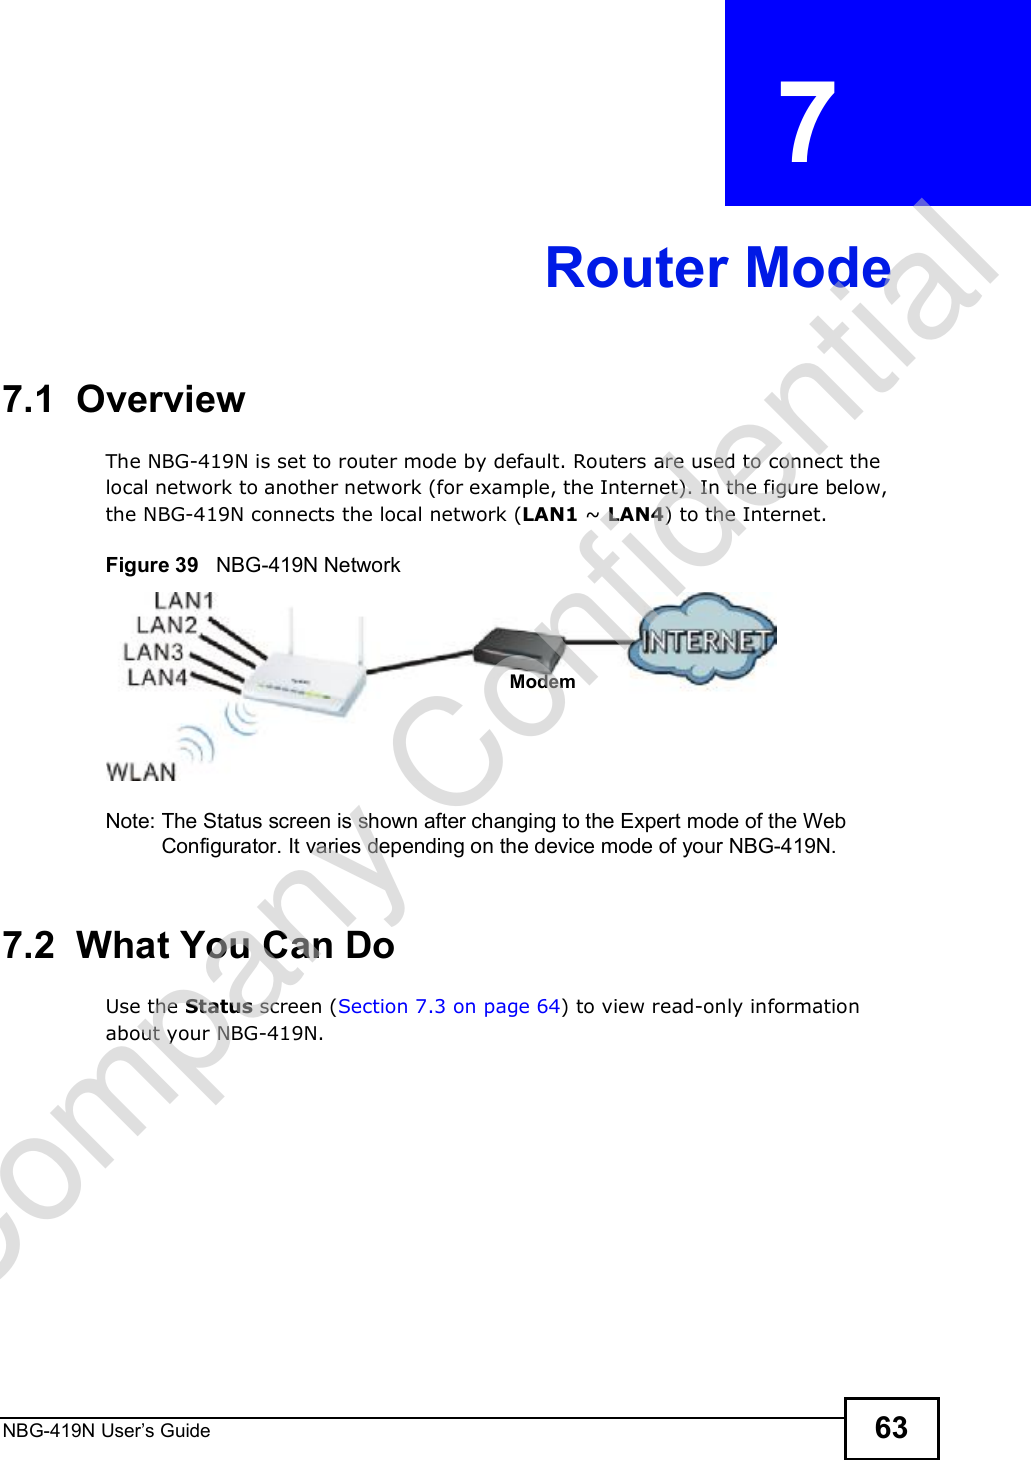 NBG-419N User s Guide 63CHAPTER  7 Router Mode7.1  OverviewThe NBG-419N is set to router mode by default. Routers are used to connect the local network to another network (for example, the Internet). In the figure below, the NBG-419N connects the local network (LAN1 ~ LAN4) to the Internet.Figure 39   NBG-419N NetworkNote: The Status screen is shown after changing to the Expert mode of the Web Configurator. It varies depending on the device mode of your NBG-419N.7.2  What You Can DoUse the Status screen (Section 7.3 on page 64) to view read-only information about your NBG-419N.ModemCompany Confidential